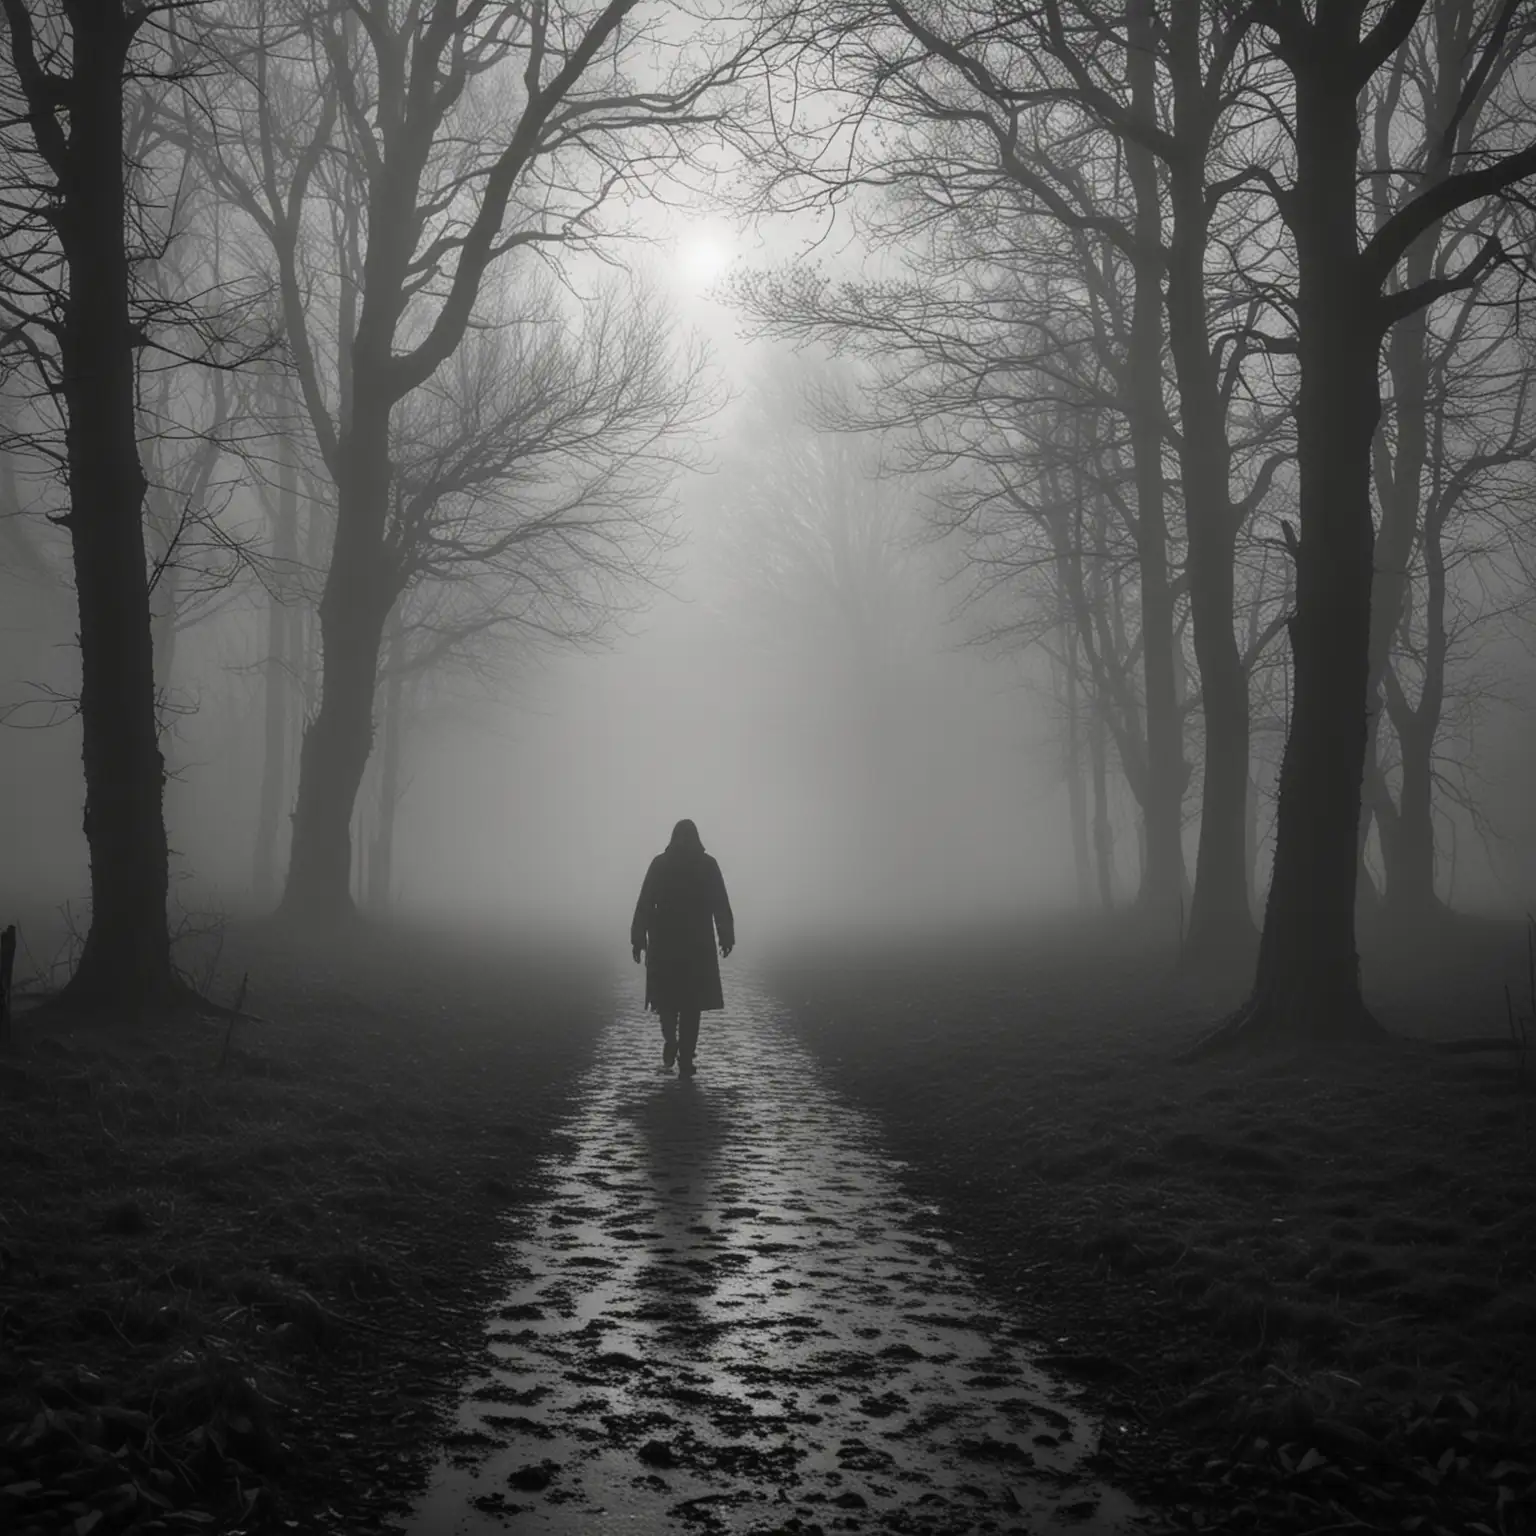 Eerie Paranormal Scene with Shadowy Figure Emerging from the Mist